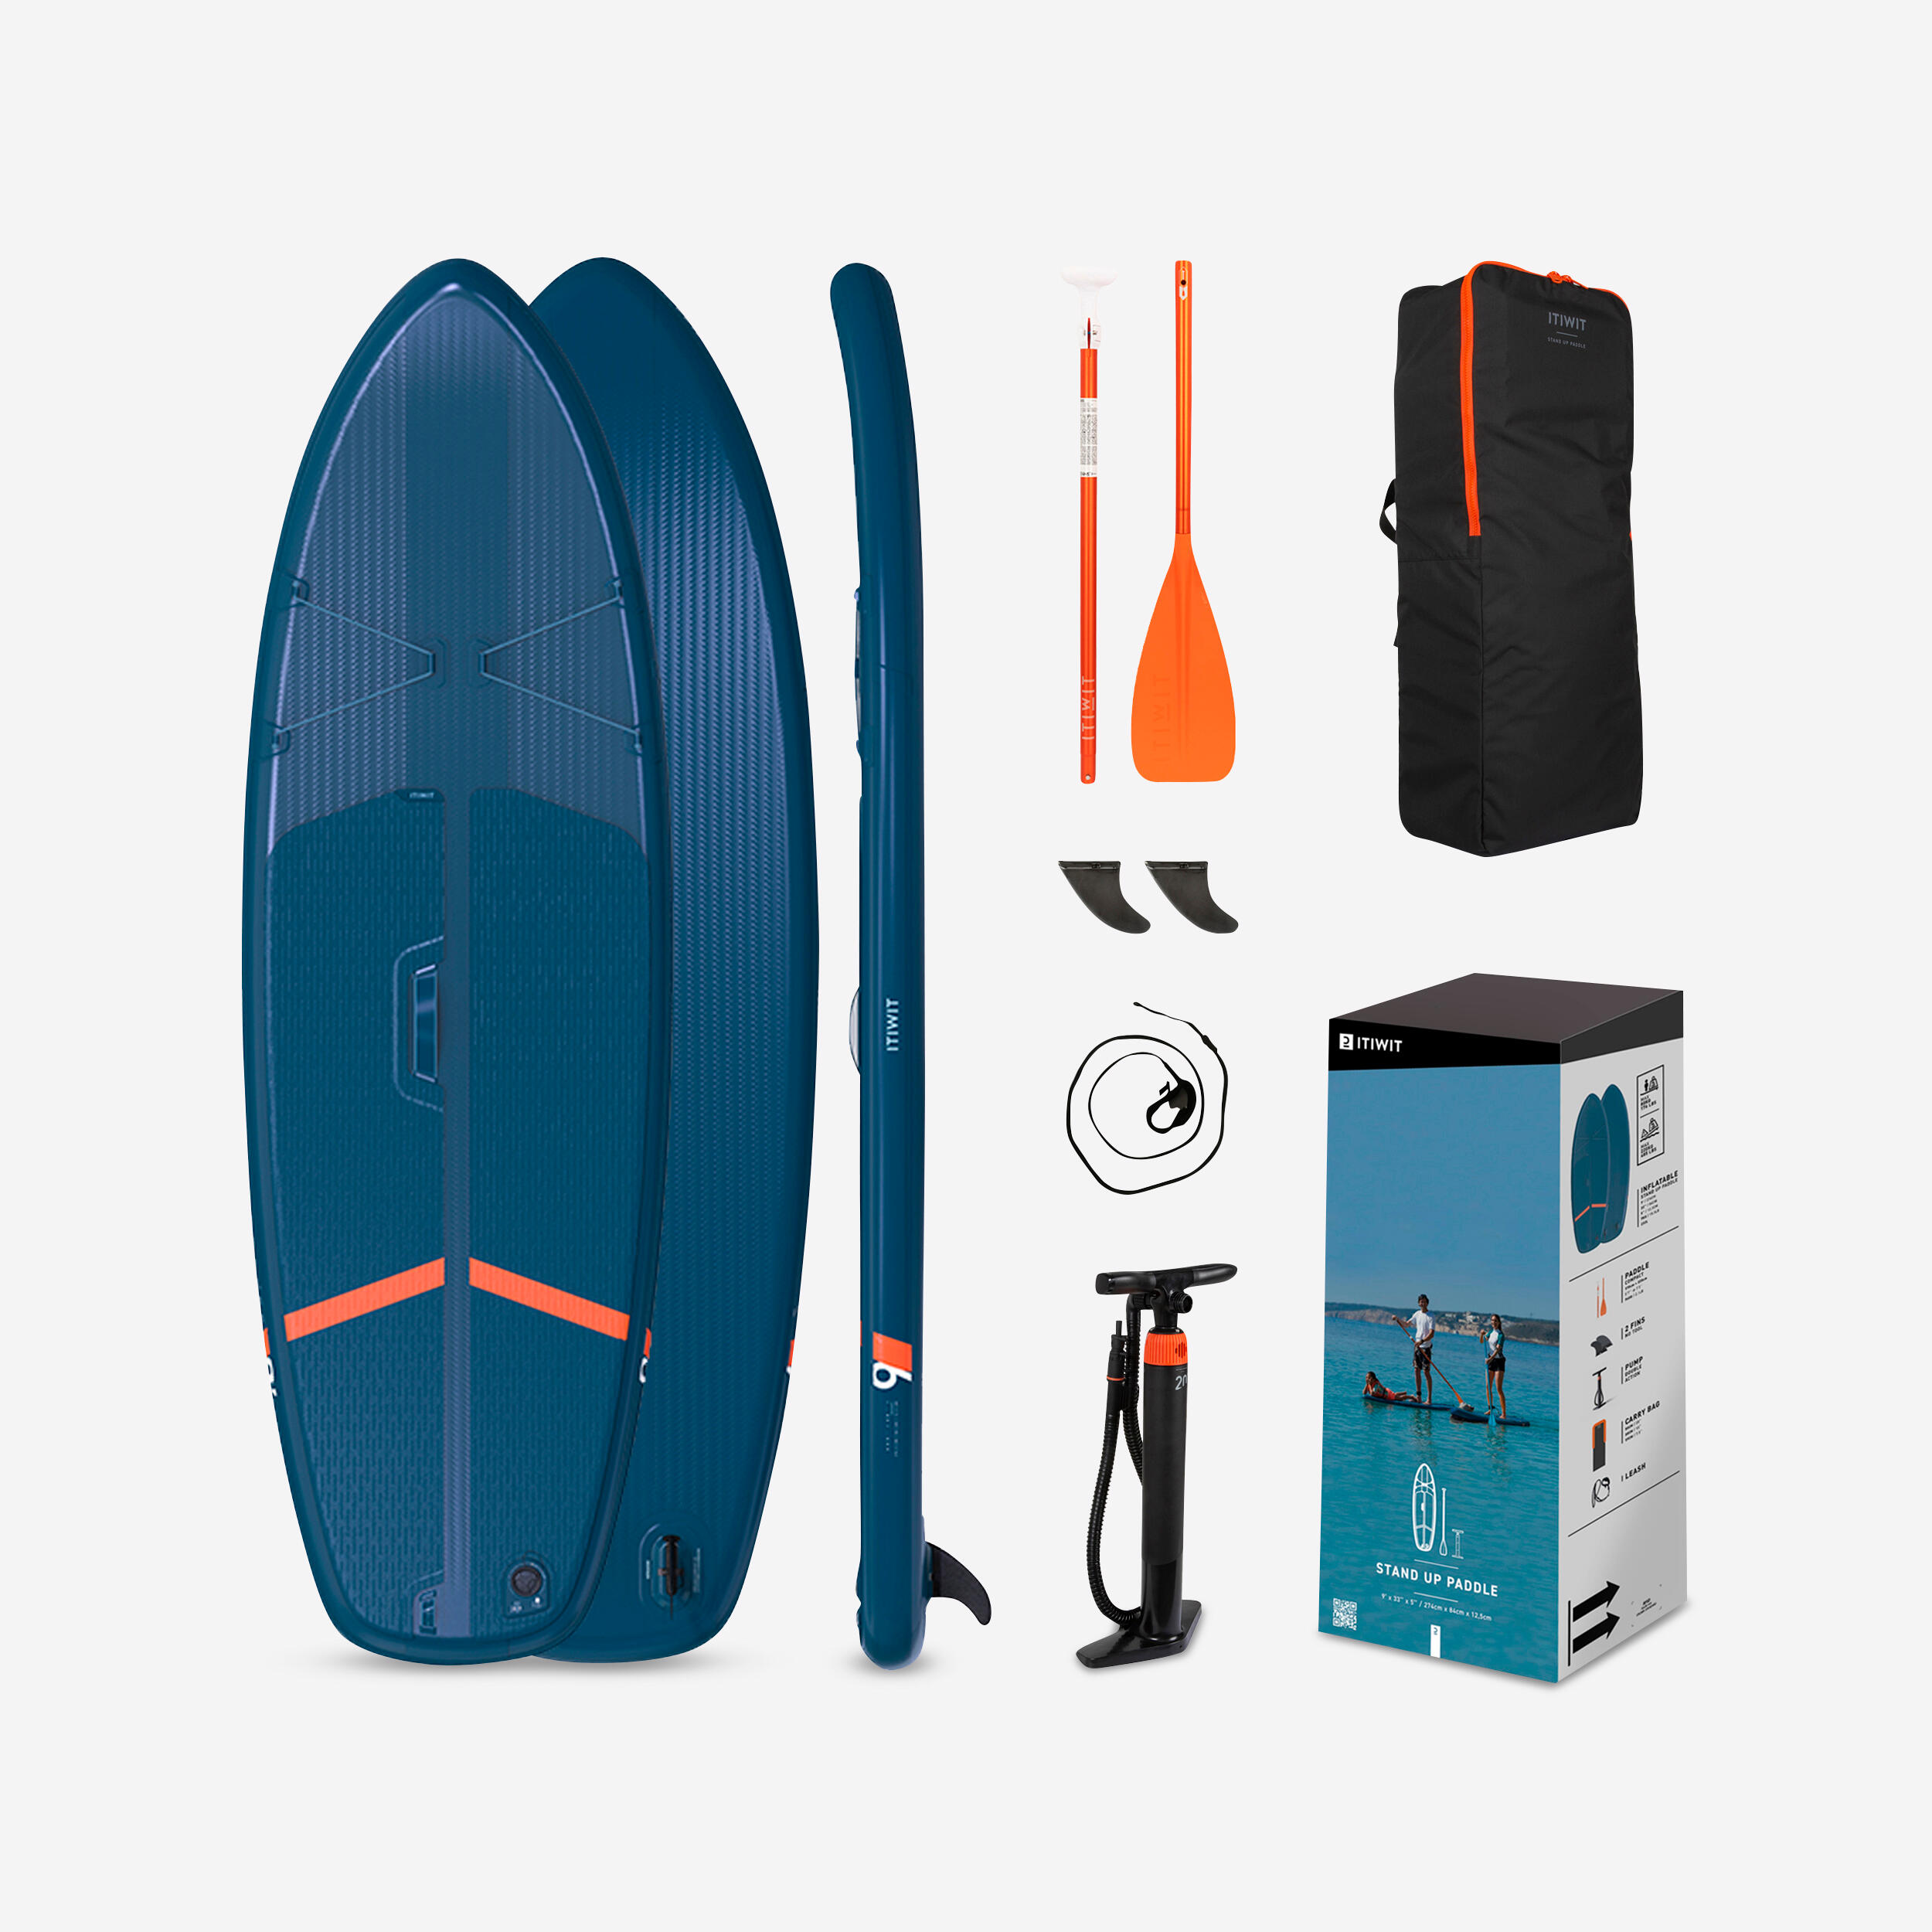 ITIWIT 9FT M INFLATABLE STAND-UP PADDLEBOARD BUNDLE 100 (SUP, BAG, PUMP & PADDLE)- 80kg